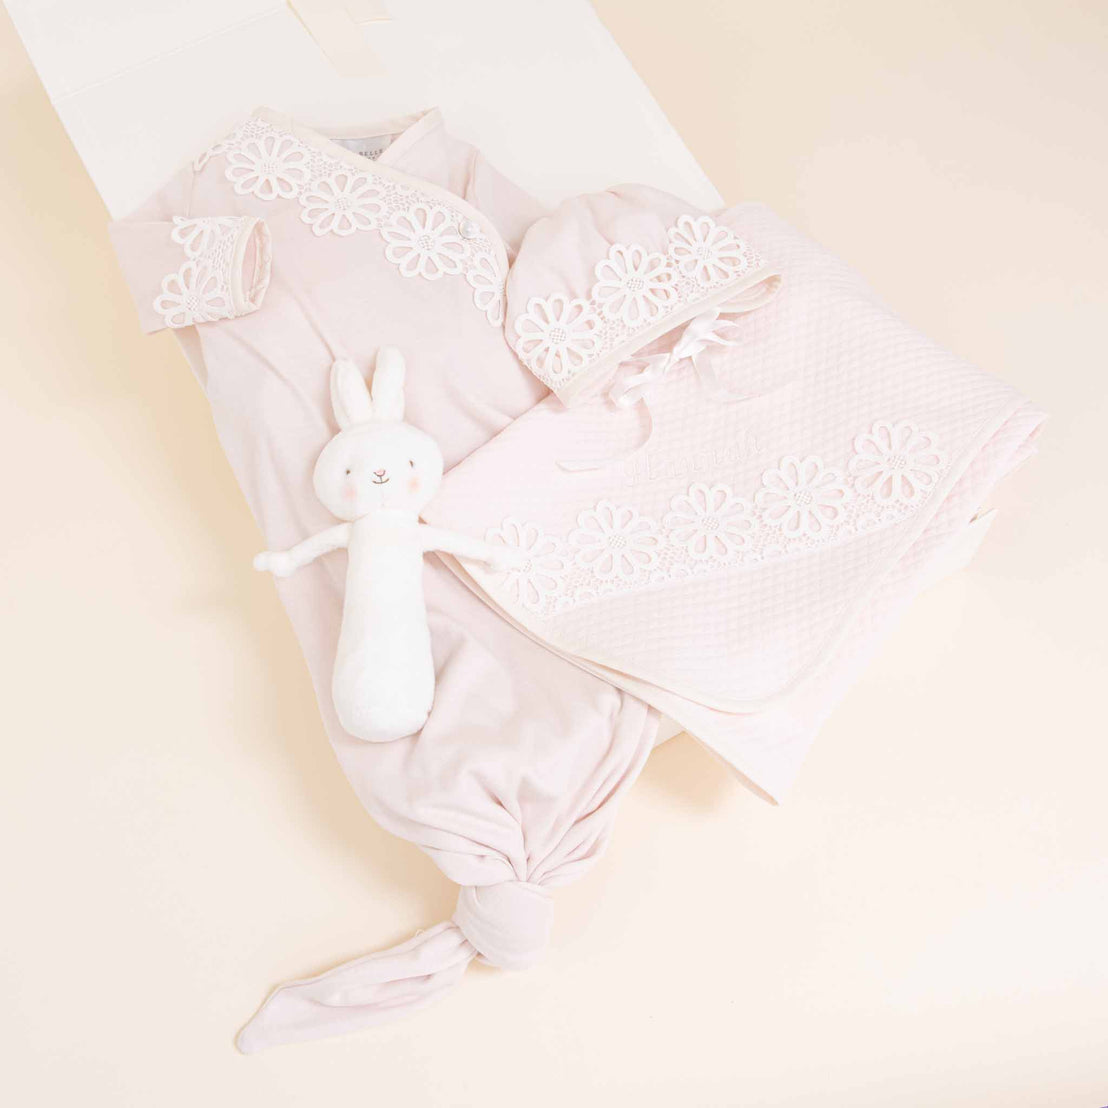 A collection of Hannah Newborn Gift Set items including a pink blanket, a onesie, and a soft white bunny toy, all arranged neatly inside an open white box against a pastel background by Baby Beau & Belle.